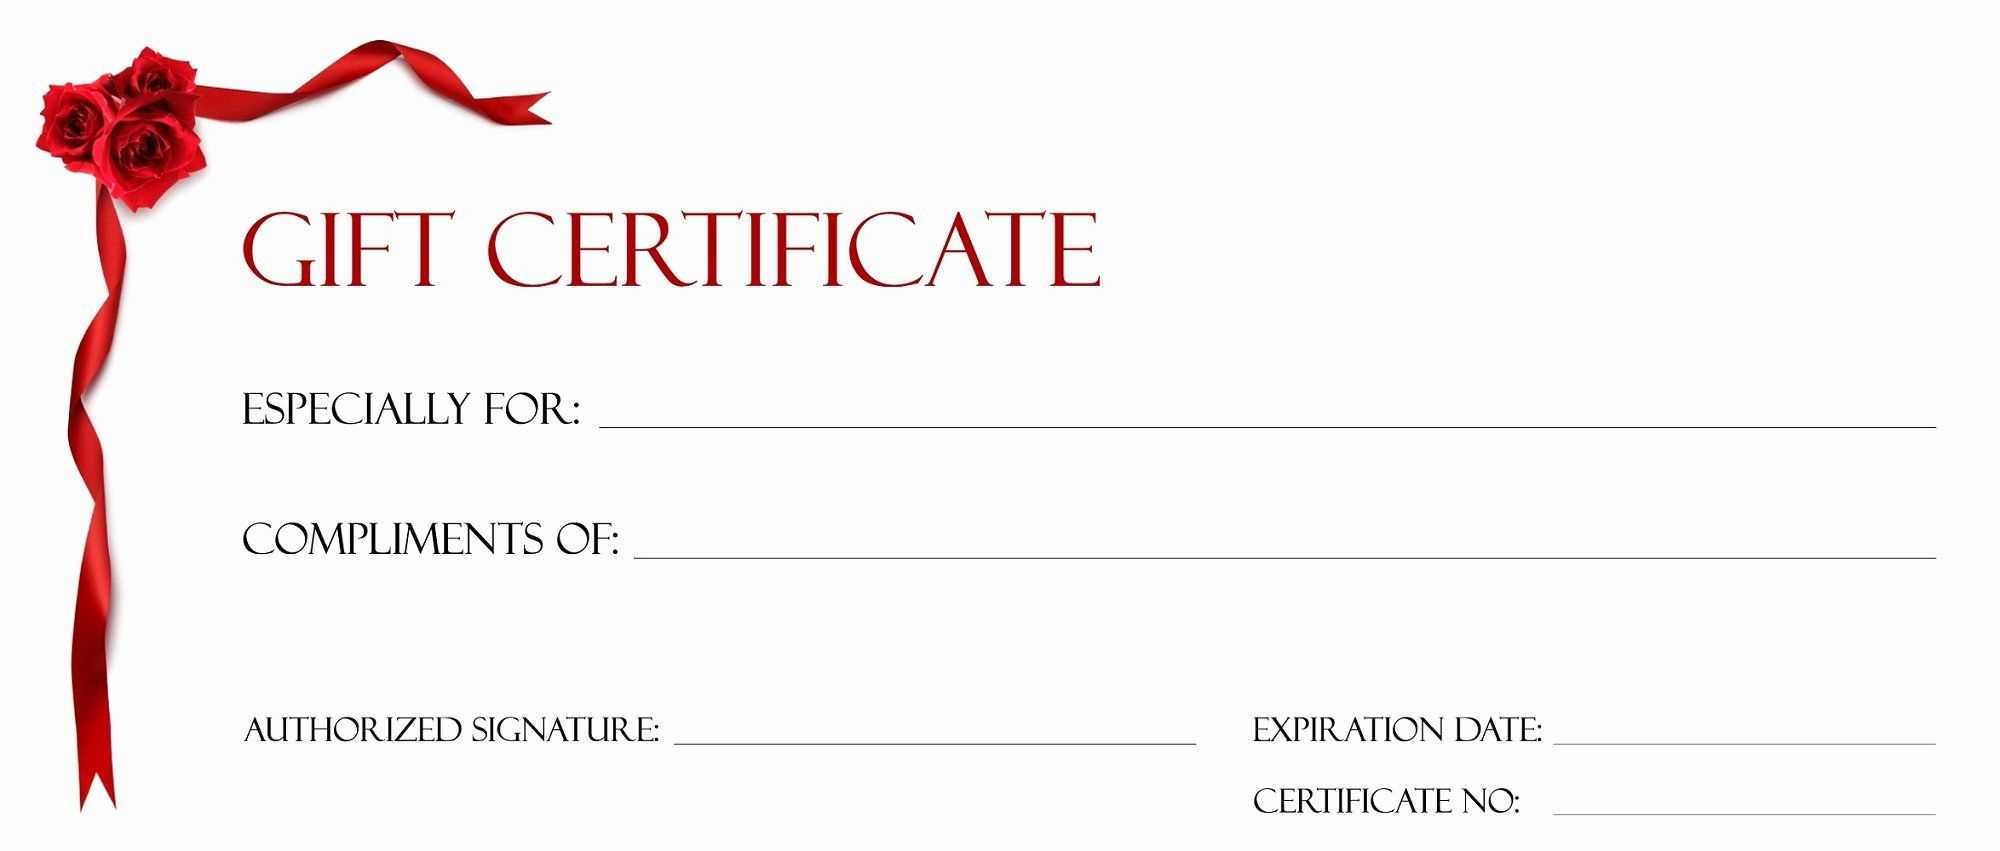 Free Gift Certificate Template Pages | Printablepedia Regarding Certificate Template For Pages